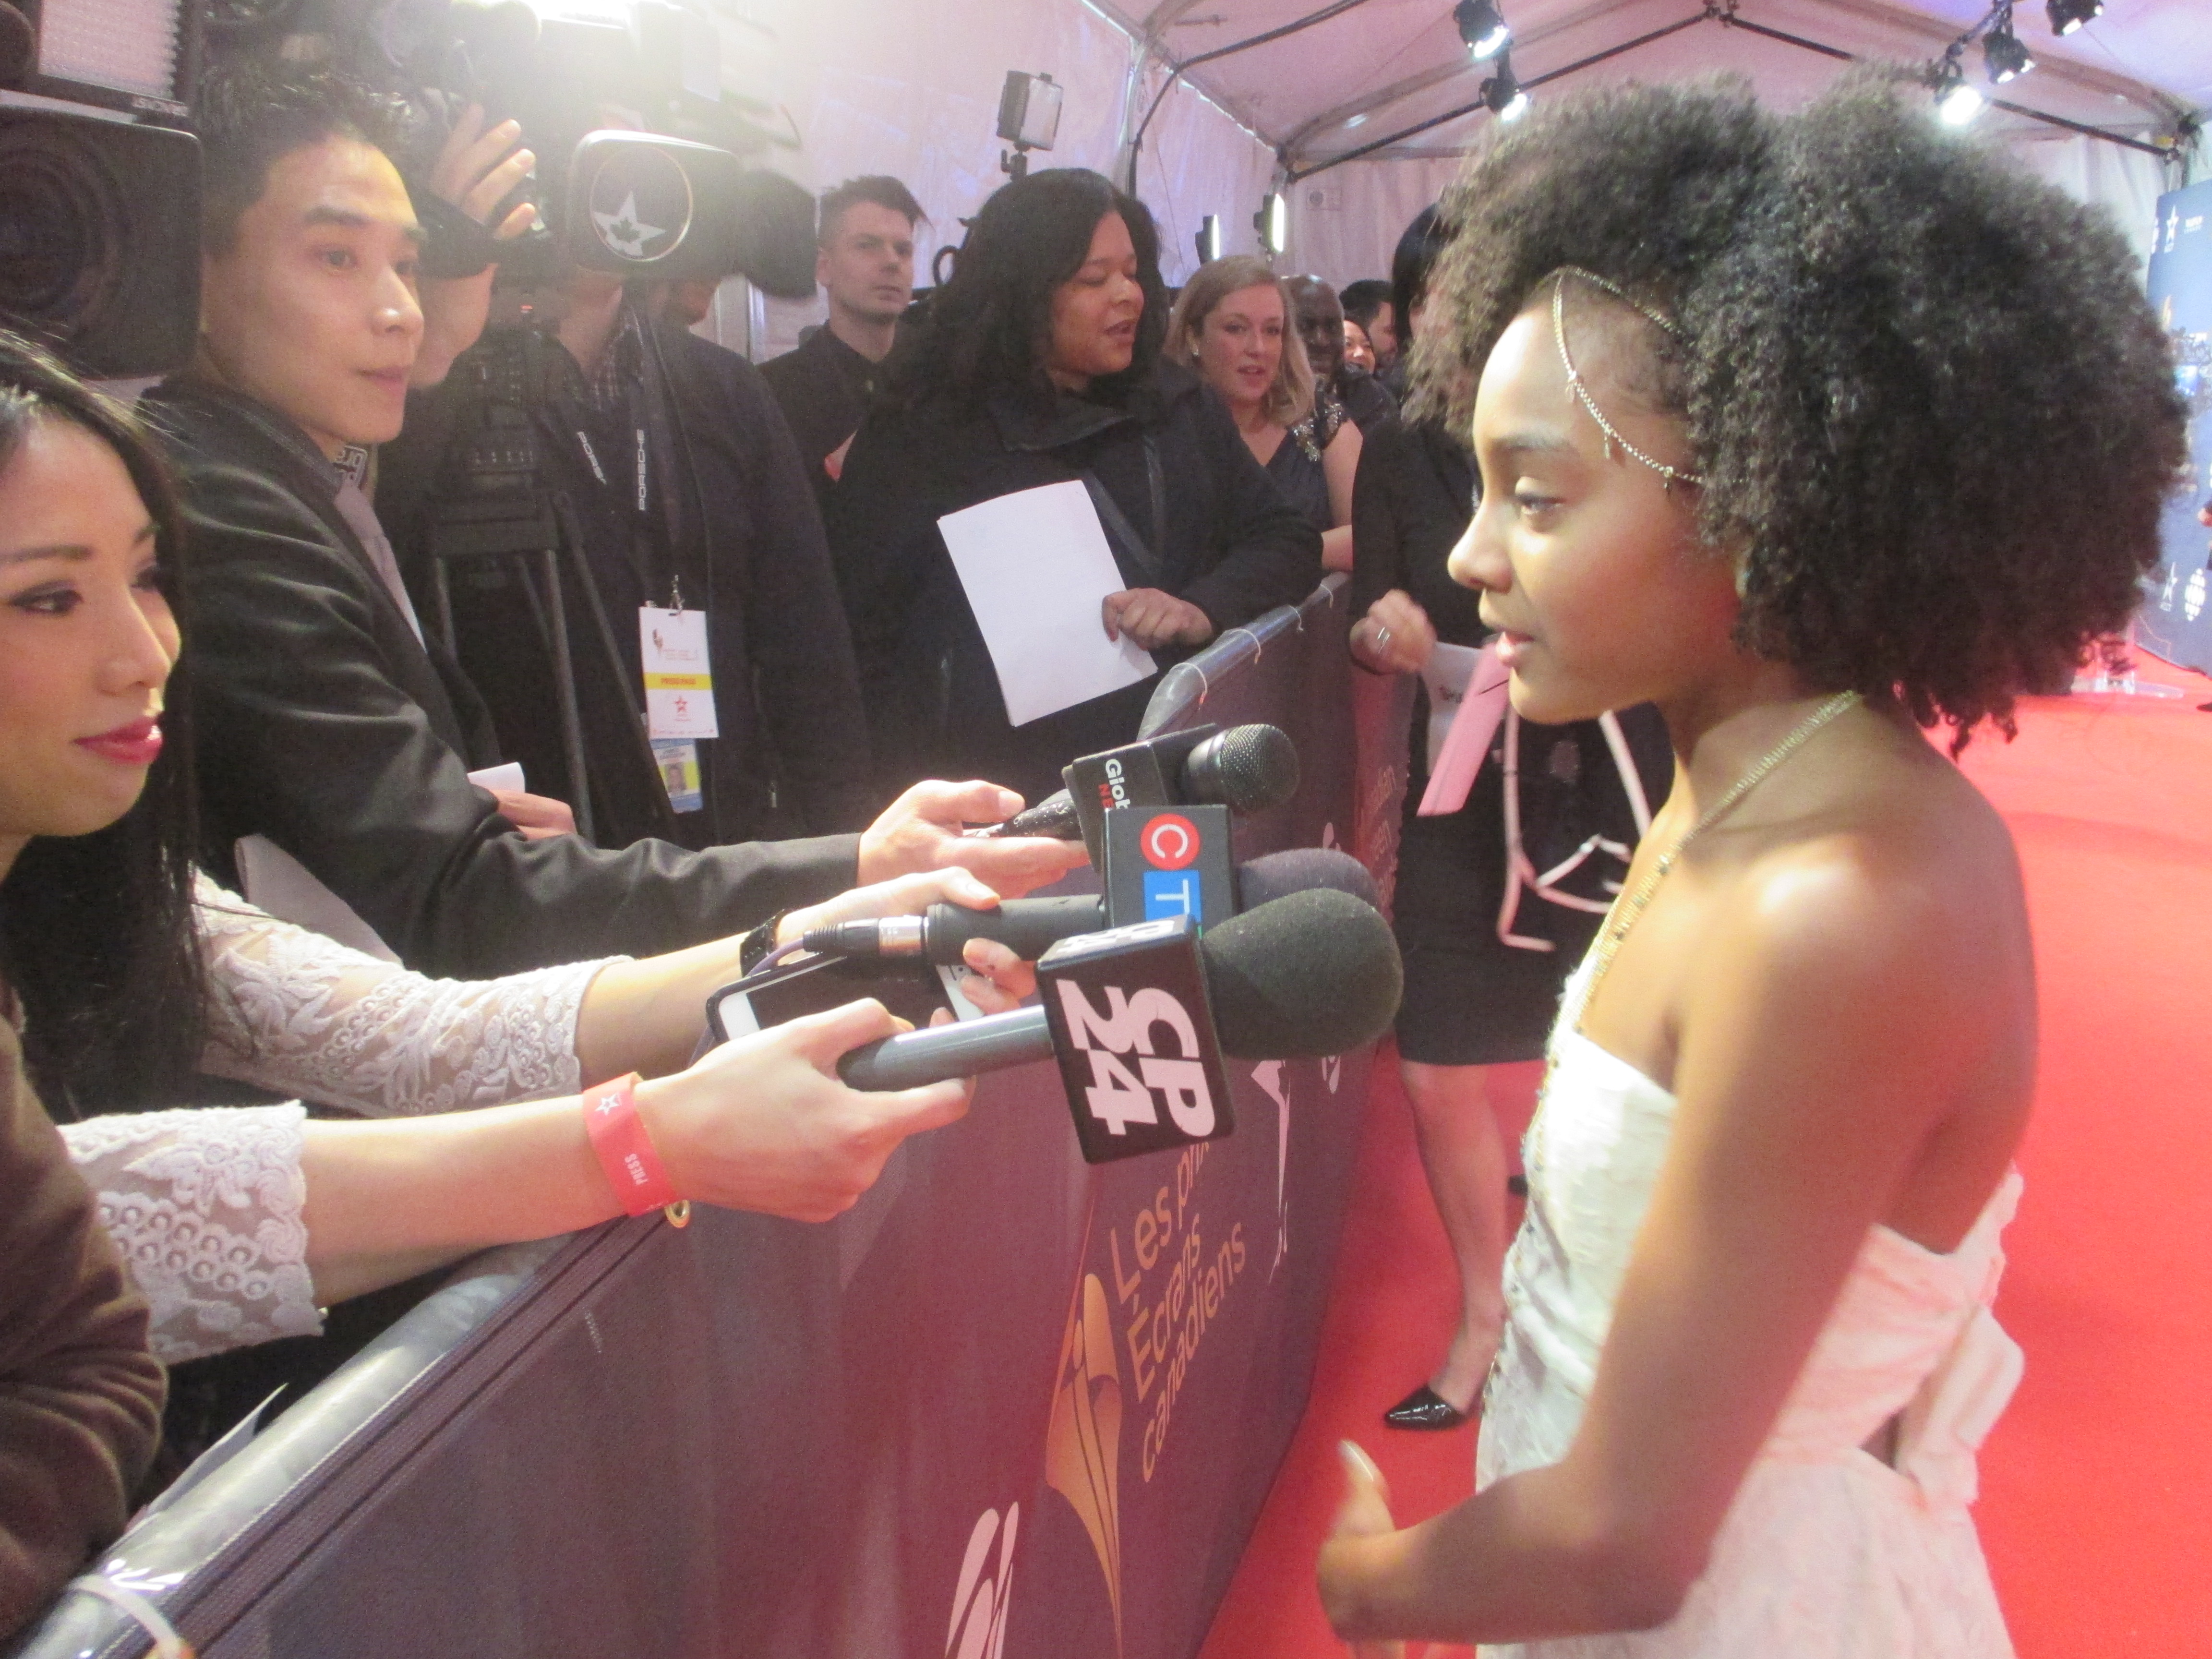 Shailyn Pierre-Dixon working the press line at the Canadian Screen Awards Red Carpet